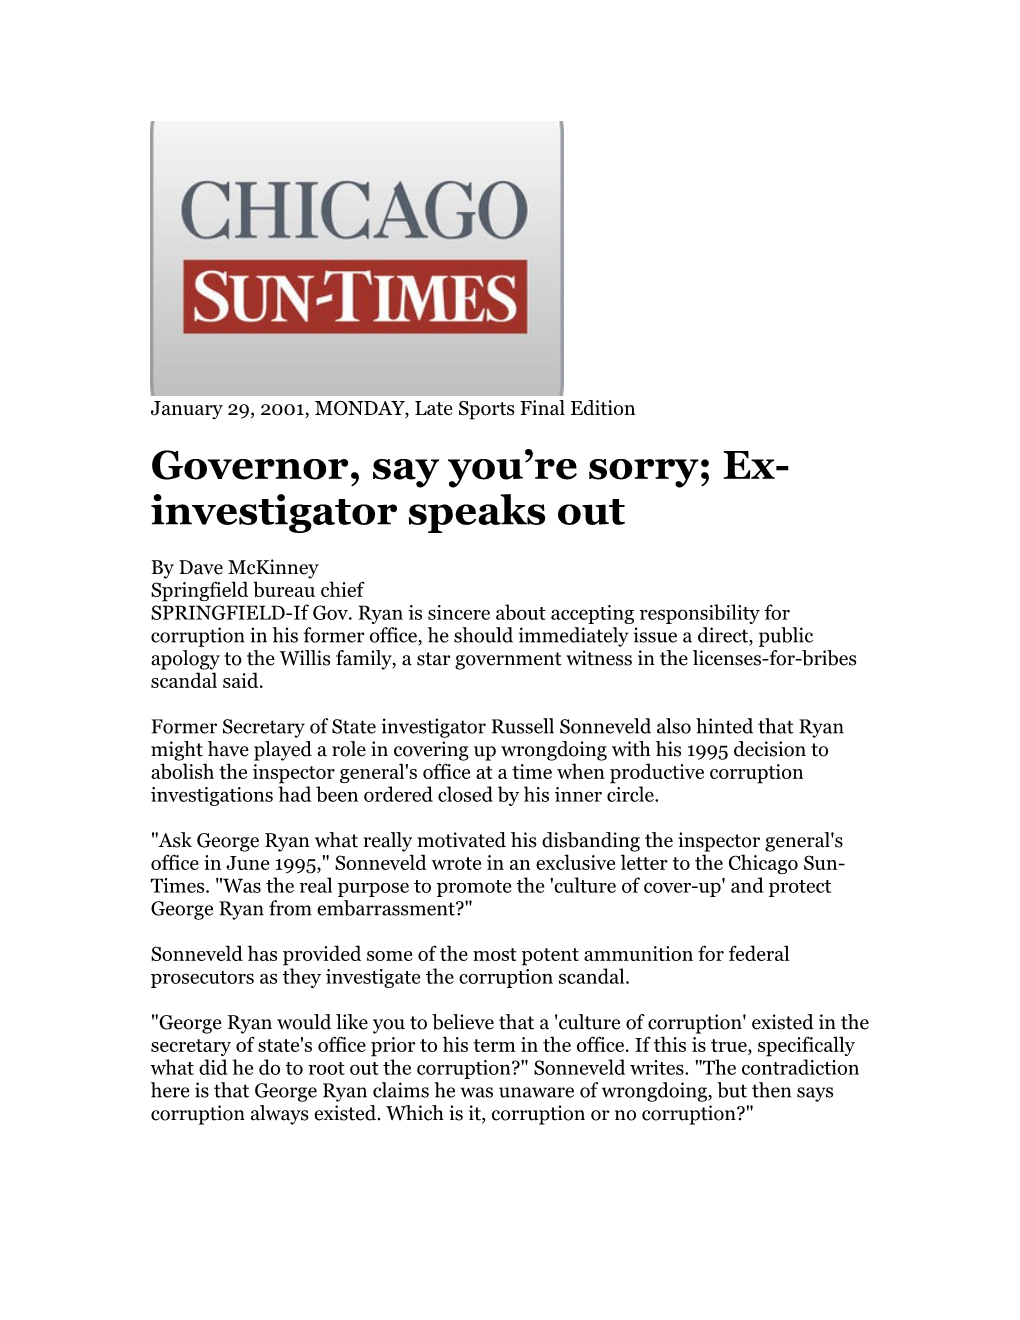 Governor, Say You Re Sorry; Ex-Investigator Speaks Out